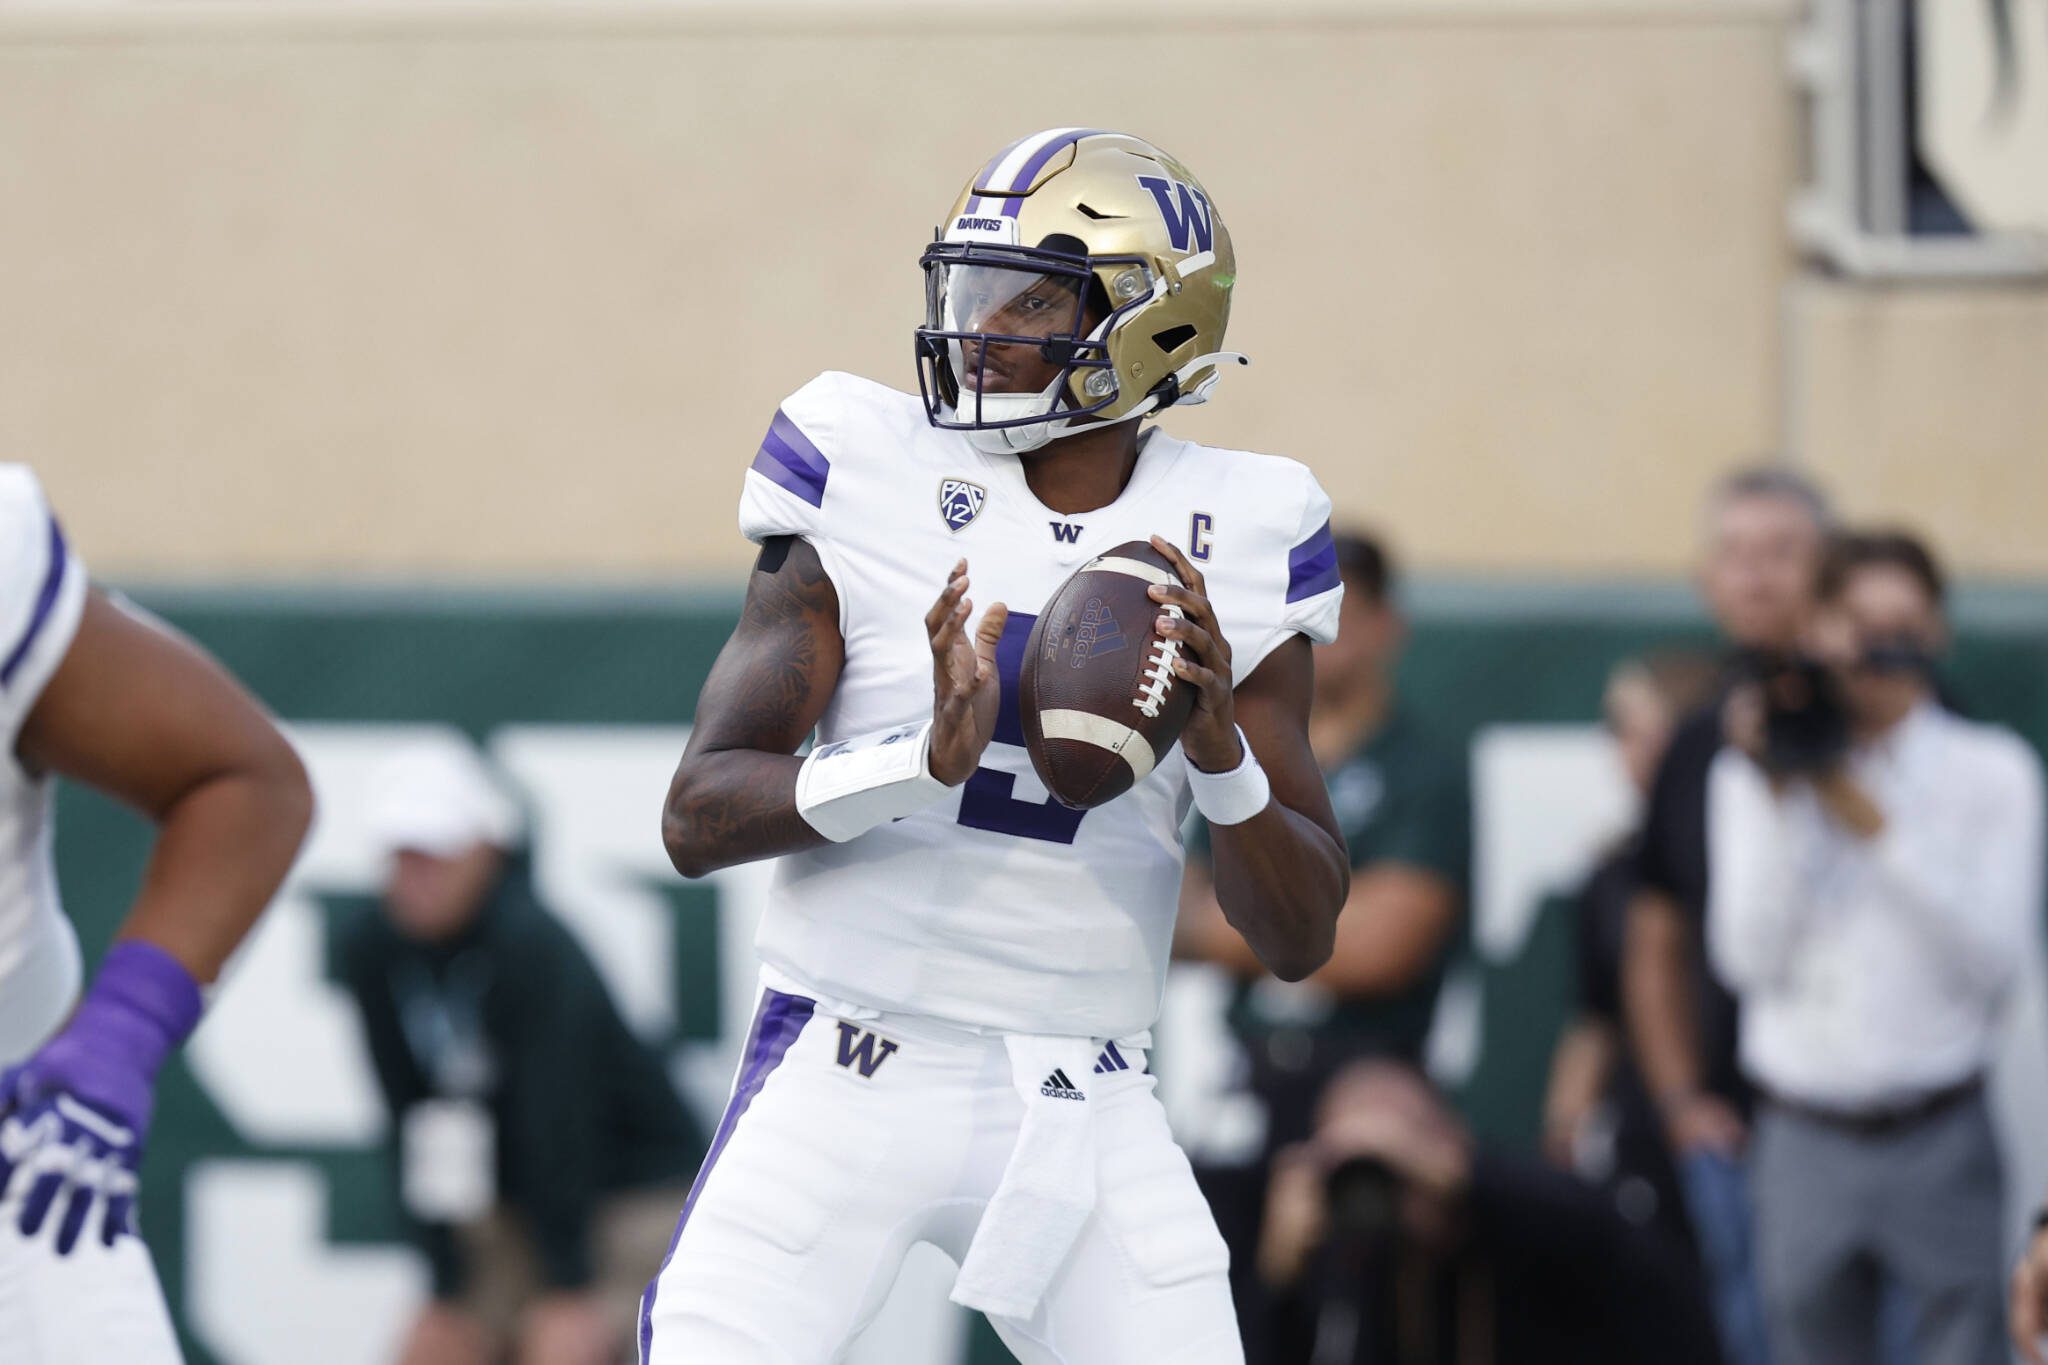 Washington quarterback Michael Penix Jr. looks to throw during the first half of Saturday’s game against Michigan State in East Lansing, Mich. (AP Photo/Al Goldis)